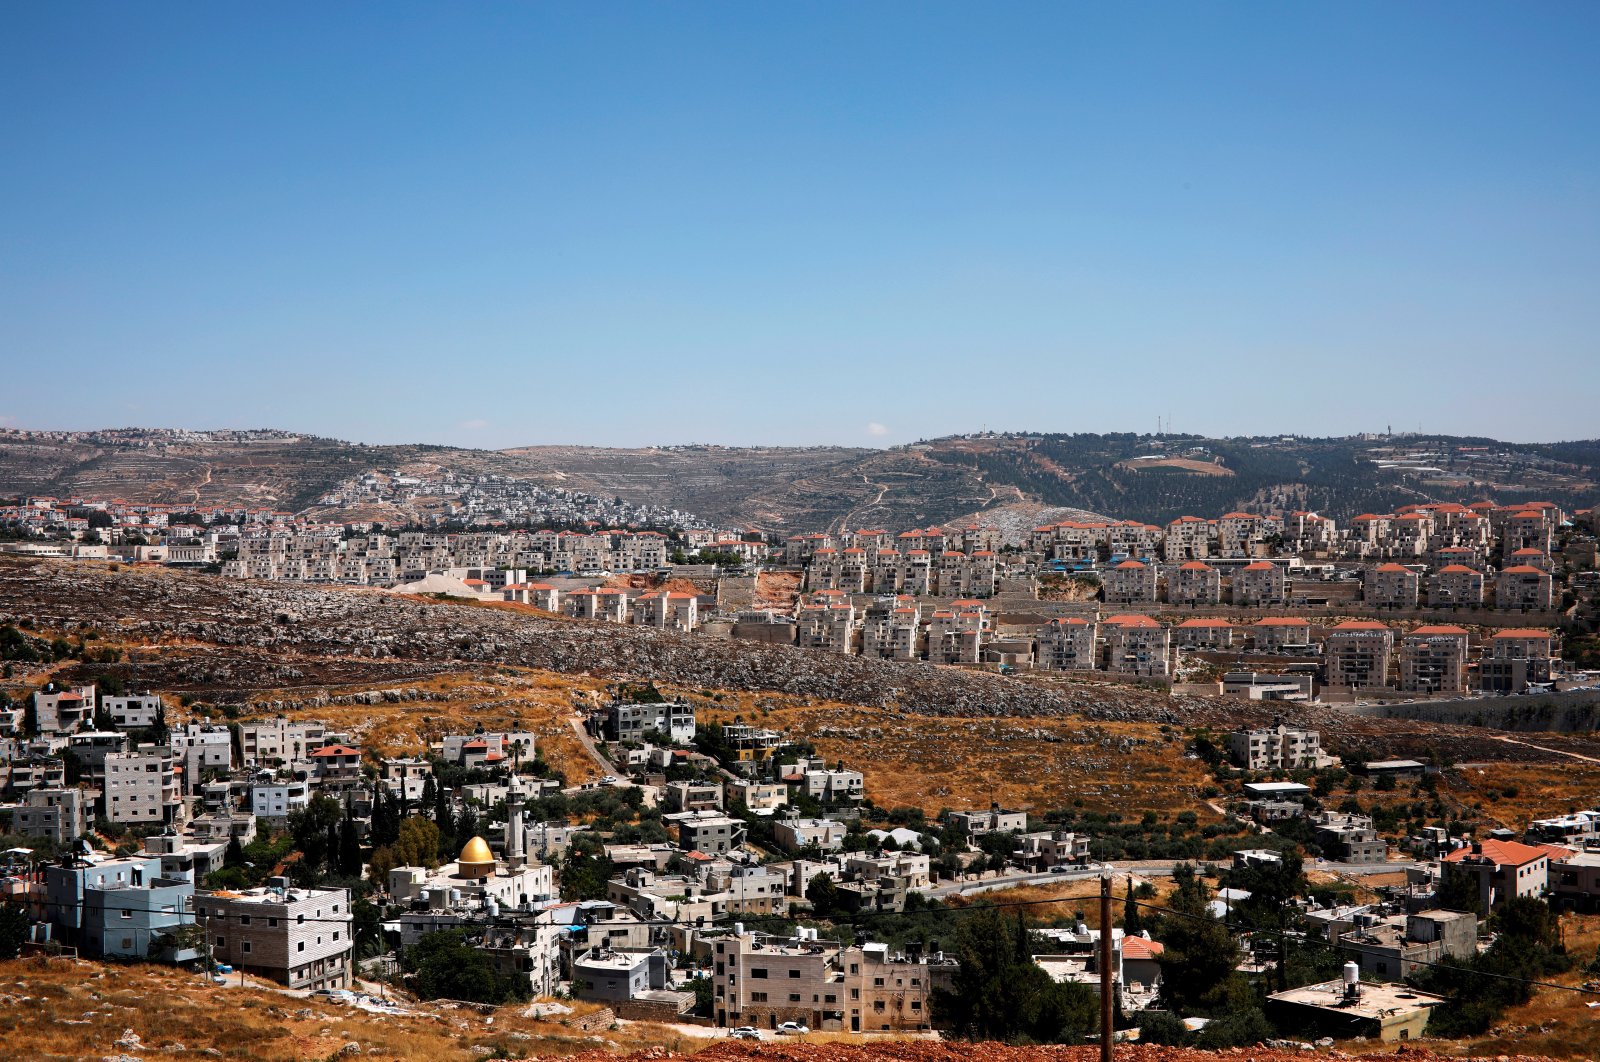 A general view shows Palestinian houses in the village of Wadi Fukin with the Israeli settlement of Beitar Illit in the background, in the occupied West Bank, June 19, 2019. (Reuters Photo)